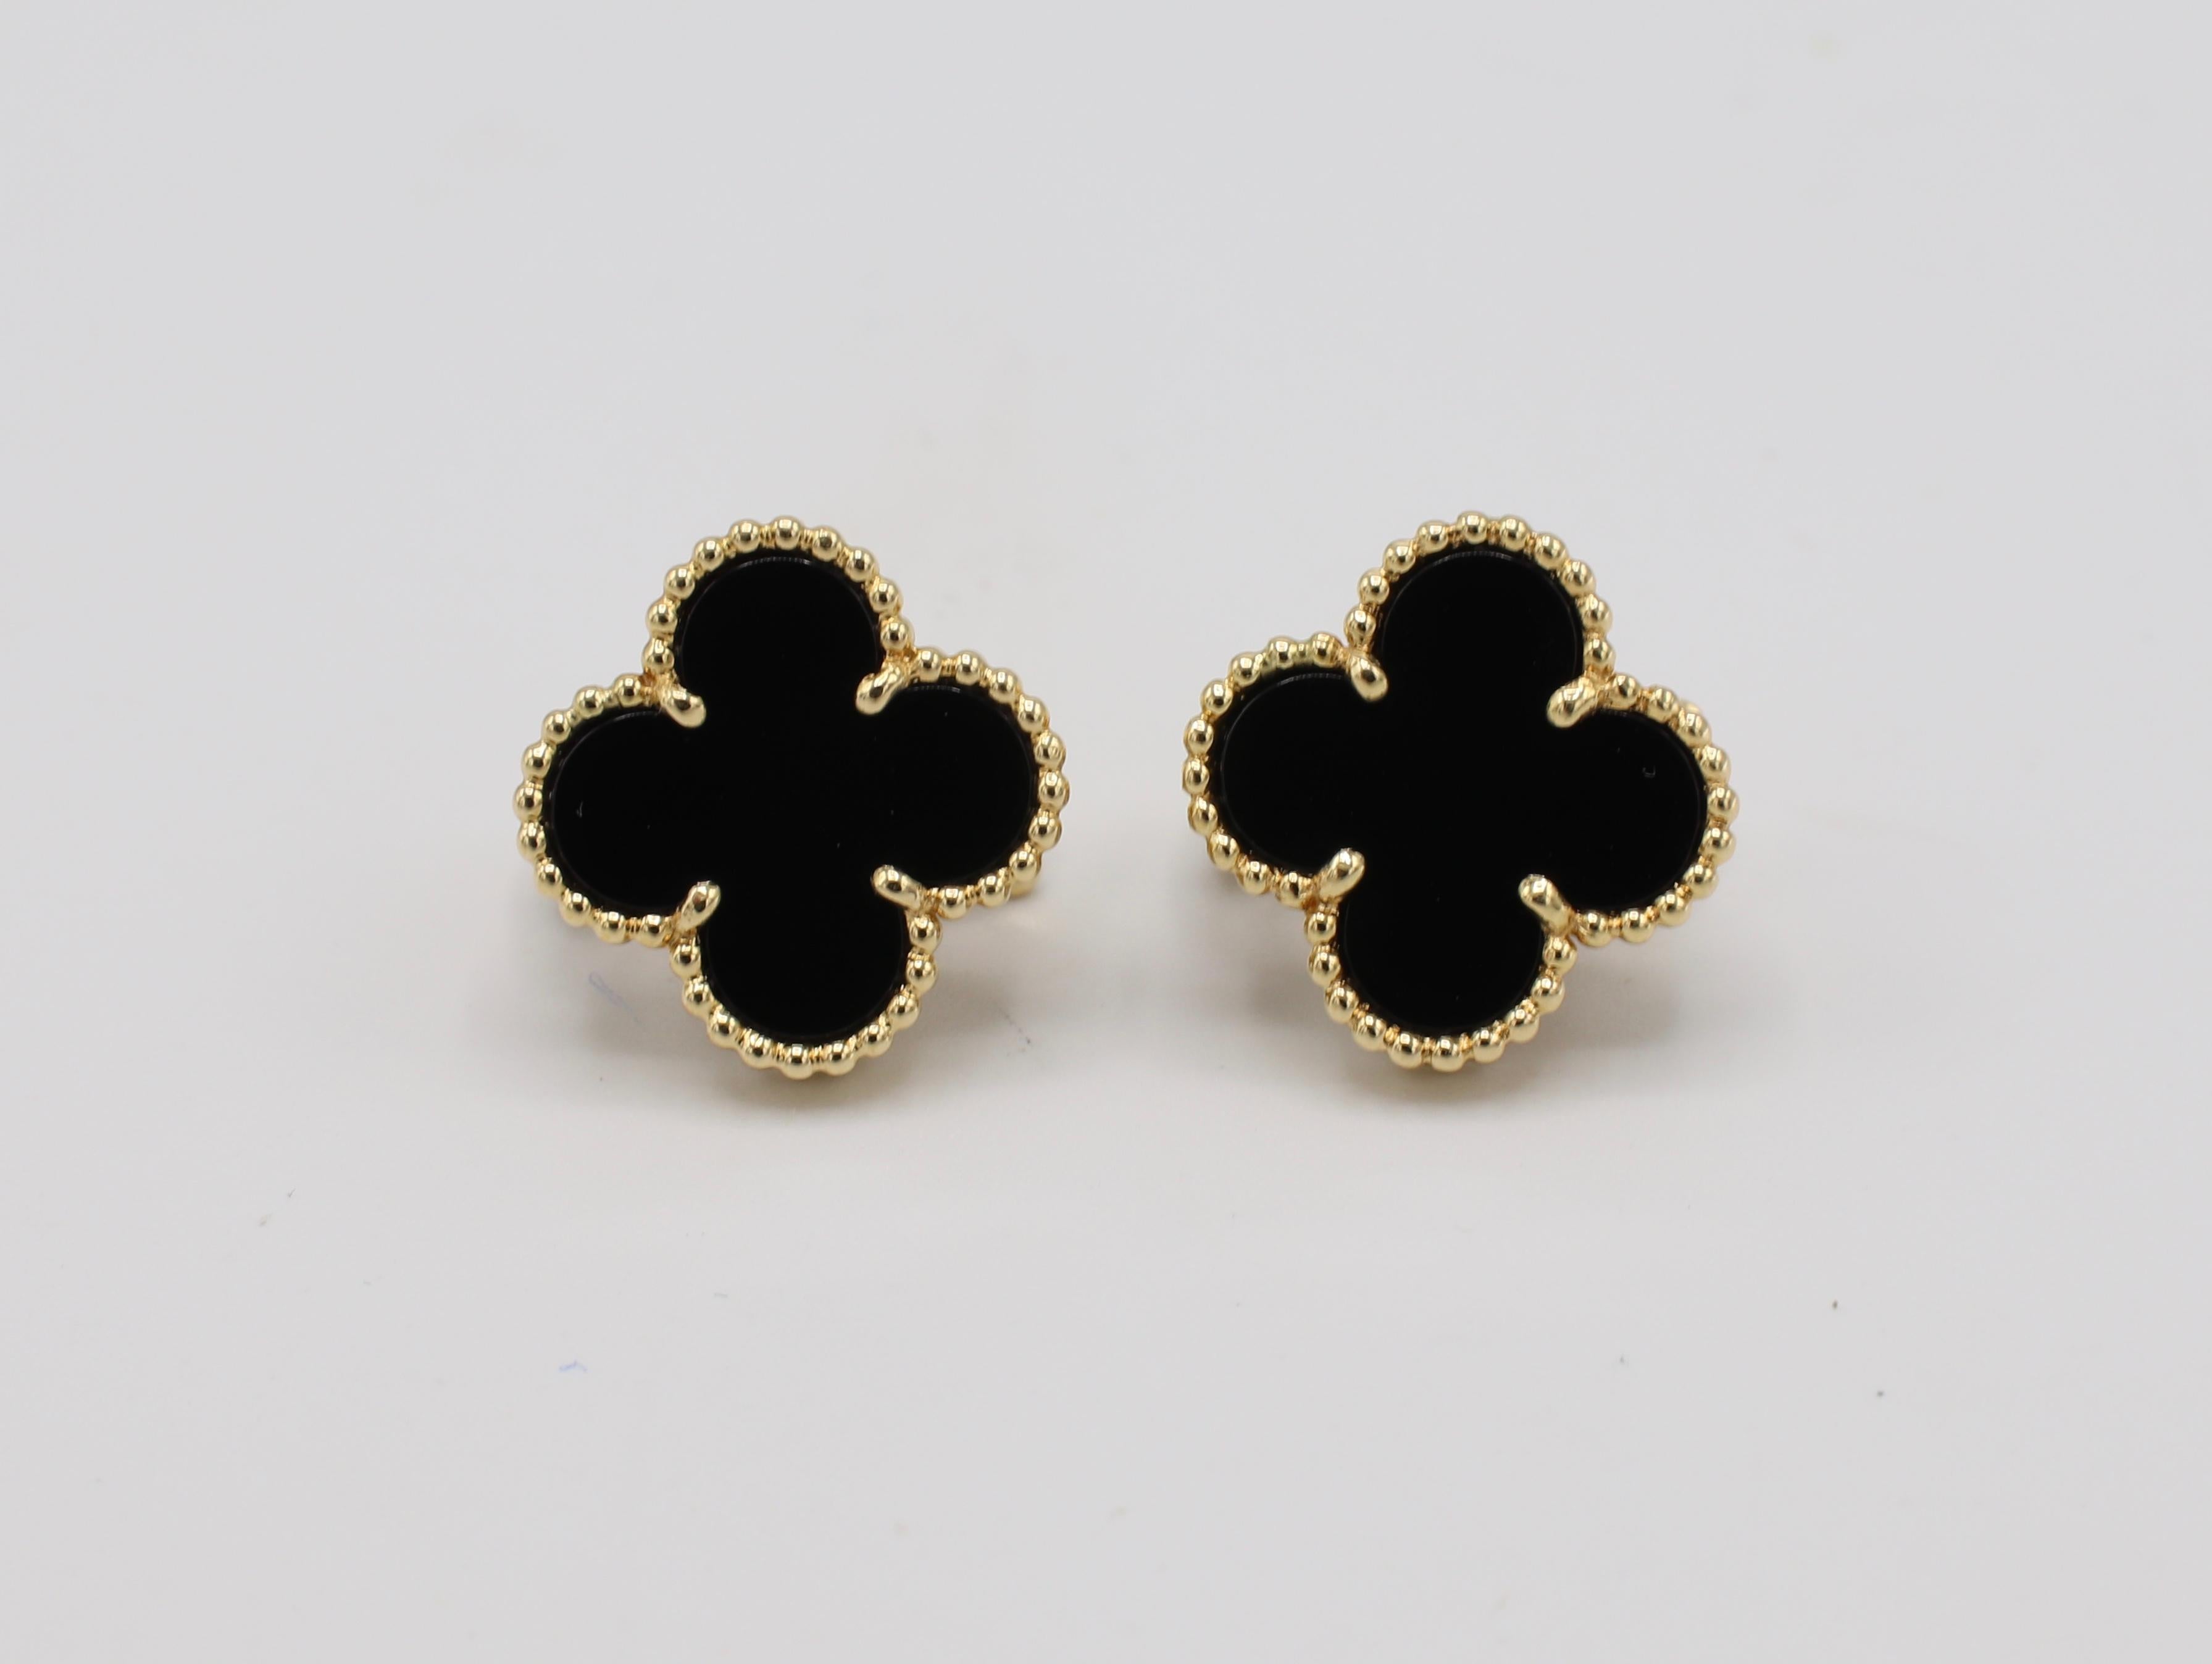 Van Cleef & Arpels VCA 18K Vintage Alhambra Onyx Earrings 

Metal: 18k yellow gold
Weight: 7.13 grams
Measurements:  15mm x 15mm 
Stones: Black onyx 
Signed: VCA Au750 JE 108*** French Hallmarks 
Original box included 

